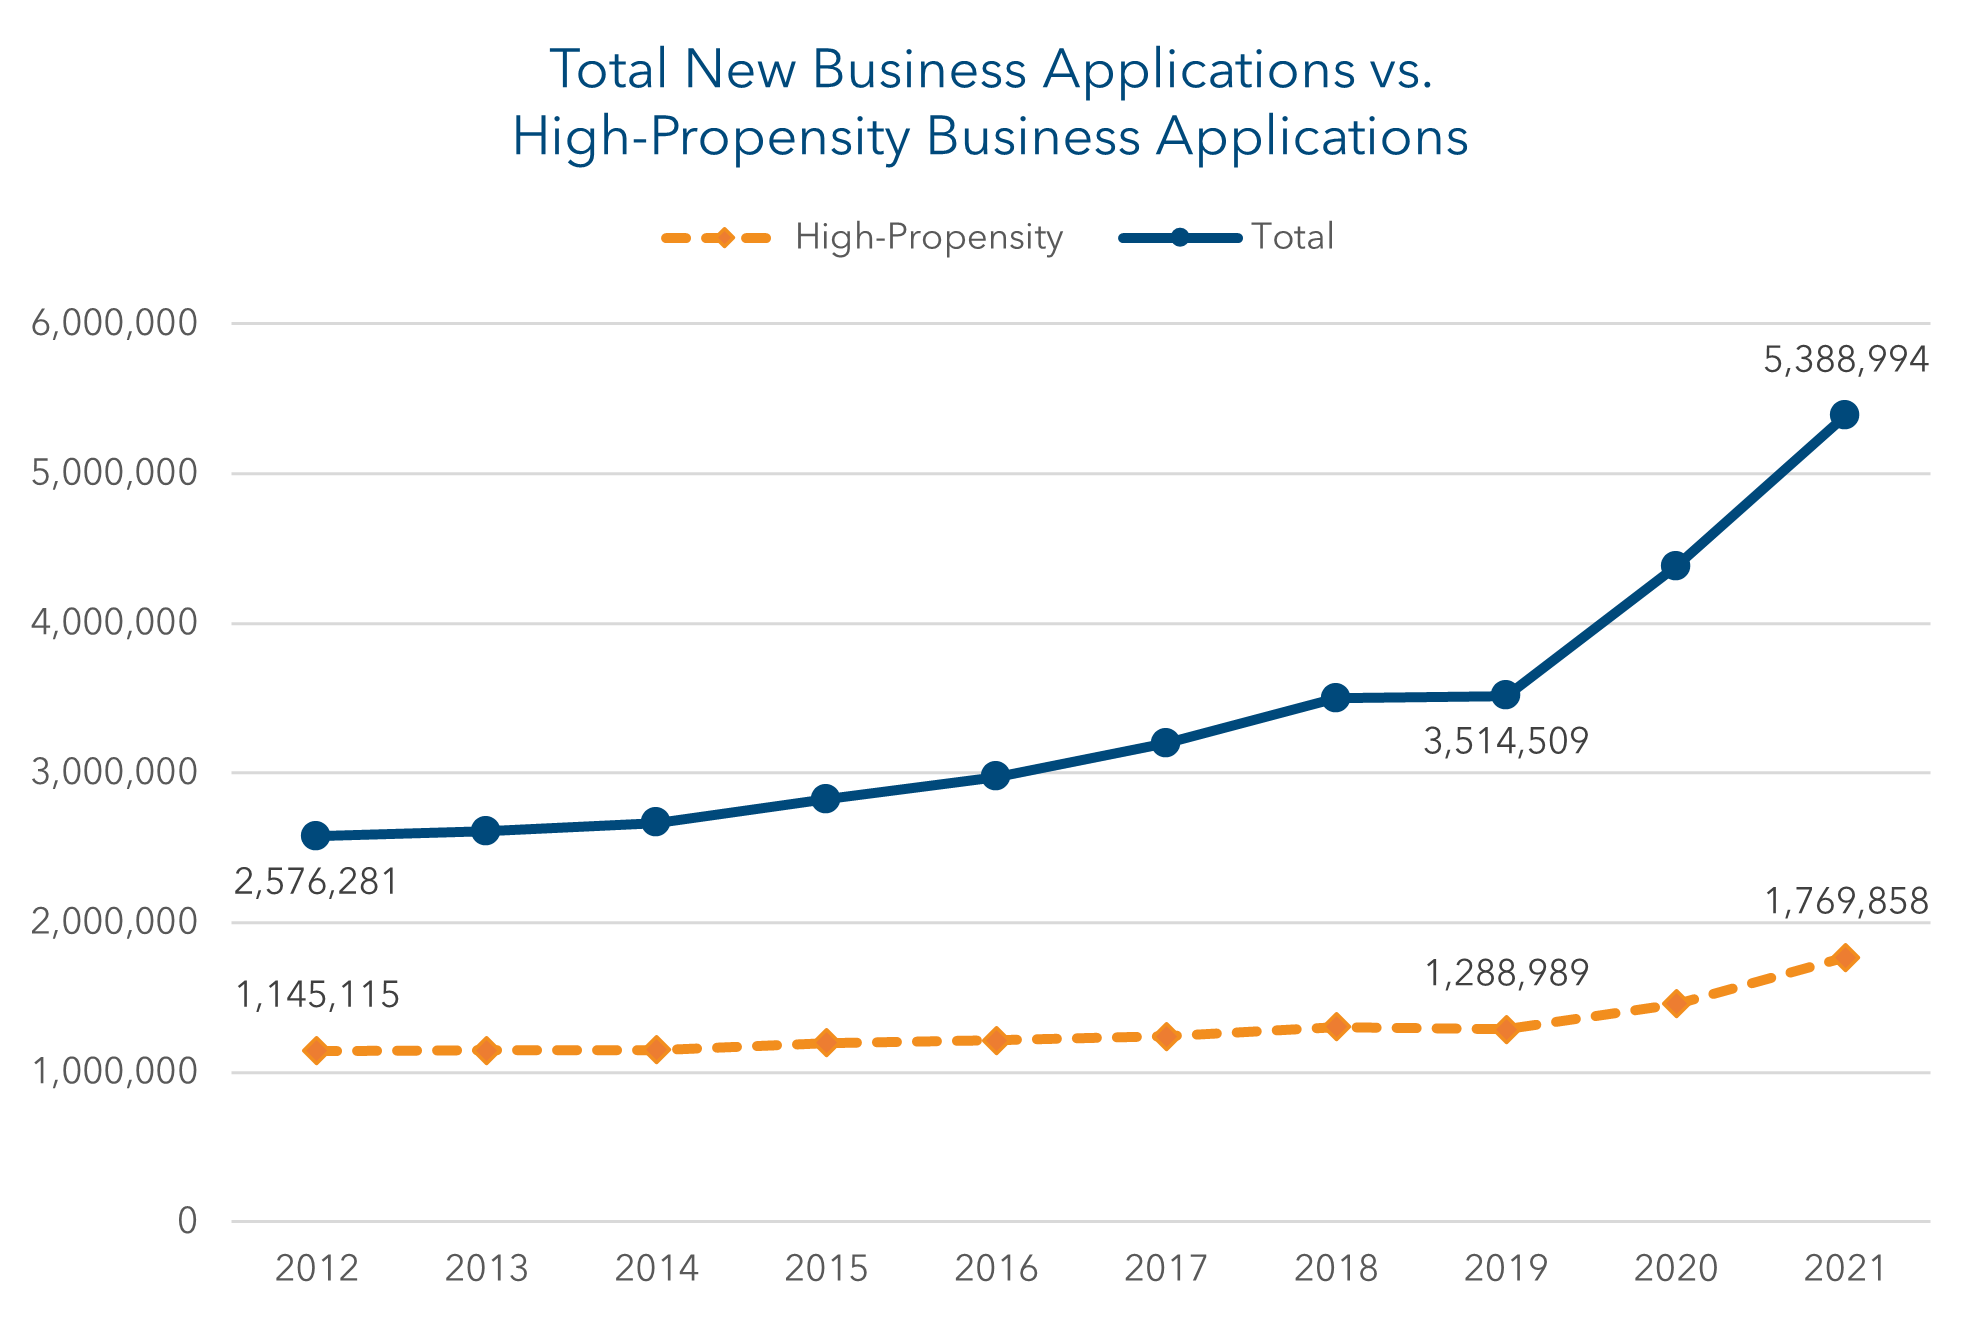 Graph of Total New Business Applications vs. High-Propensity Business Applications over time. Total new business applications rise steadily from 2,576,281 in 2012 to 3,514,509 in 2019, followed by a sharp rise to 5,388,994 in 2021. High-propensity business applications rise from 1,145,115 in 2012 to 1,288,989 in 2019, and accelerate to 1,779,858 in 2021.